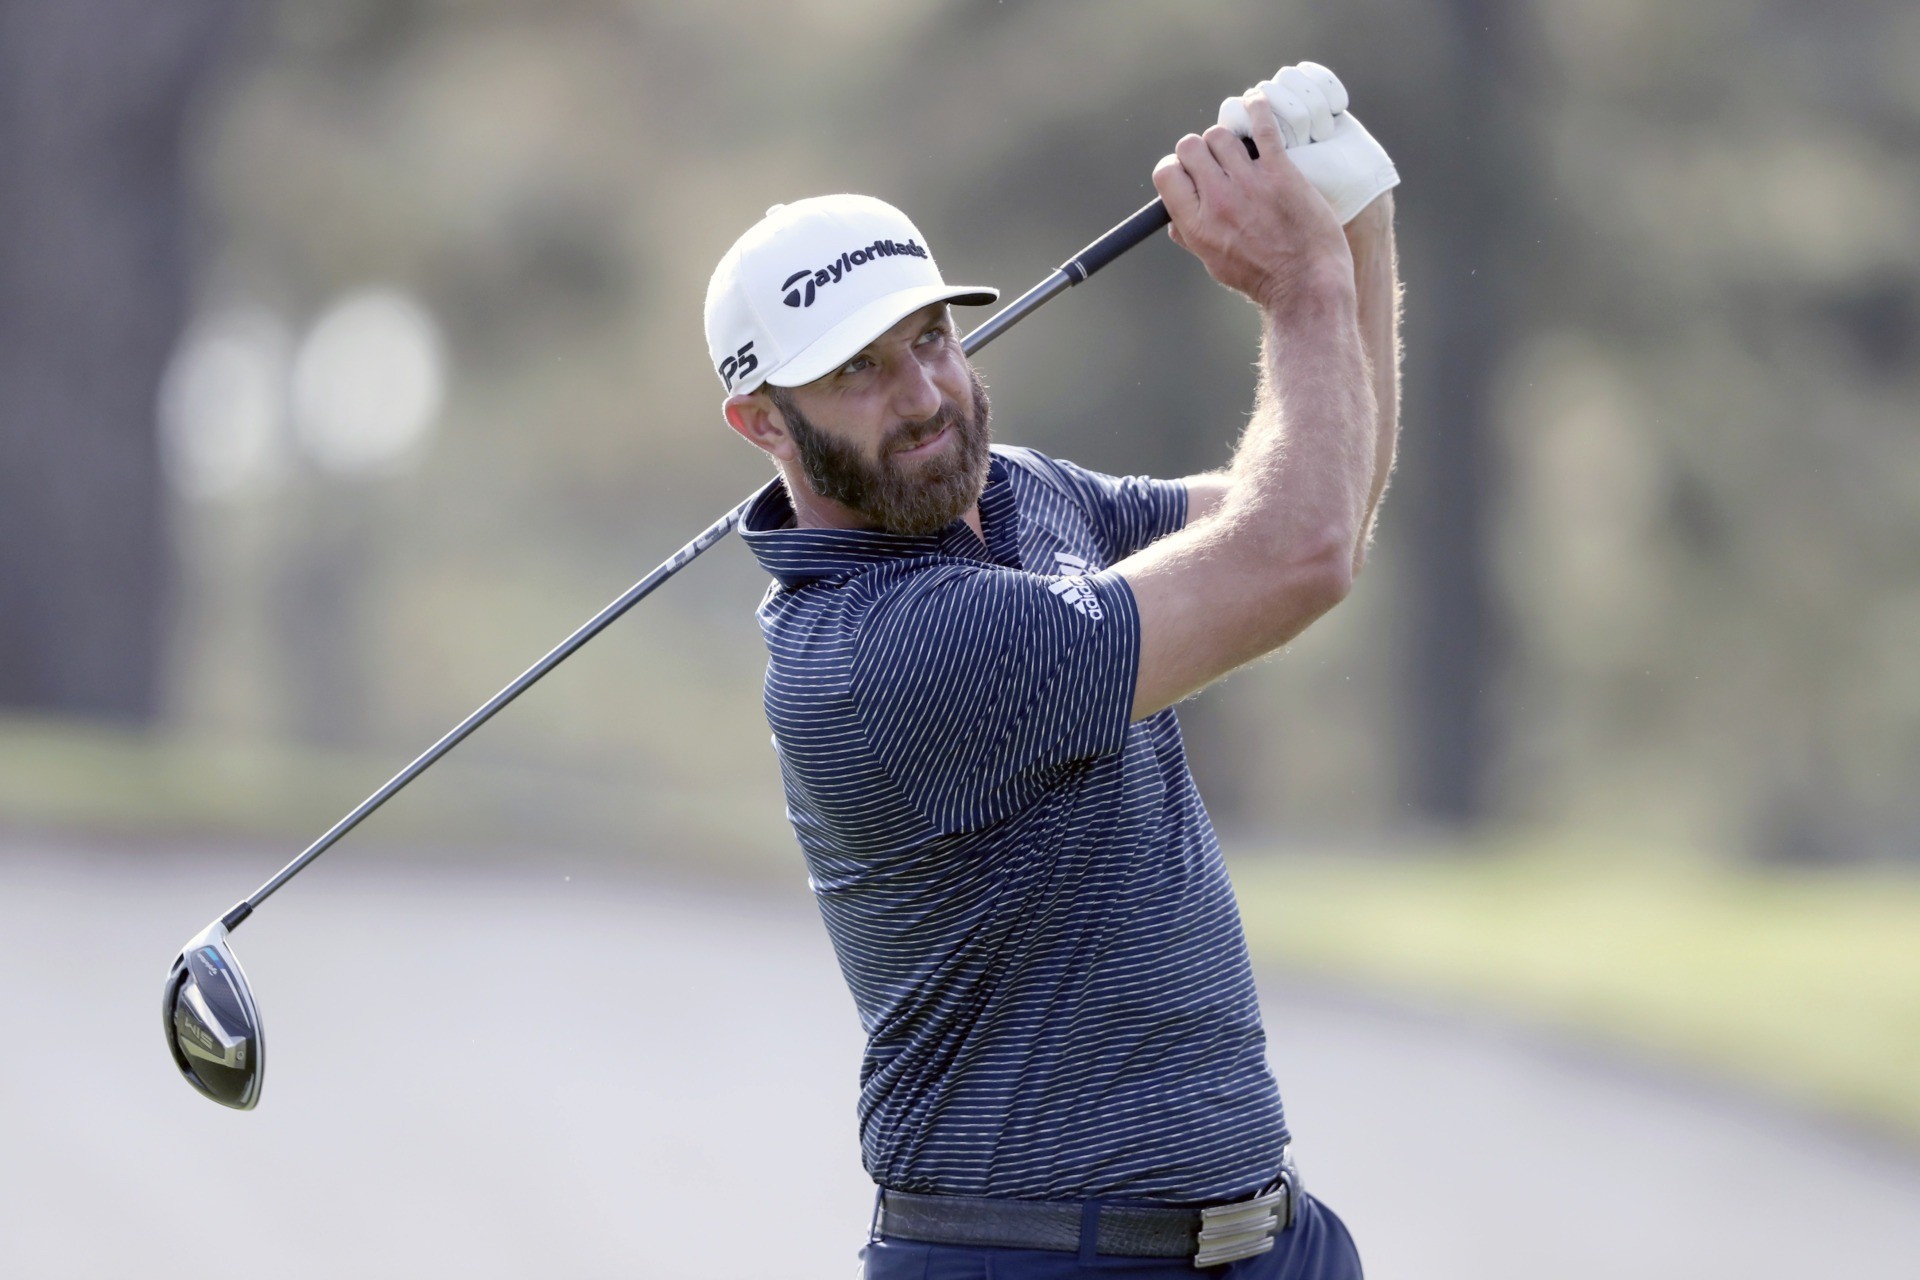 Dustin Johnson has won the Masters for the first time, shooting a 68 in the...